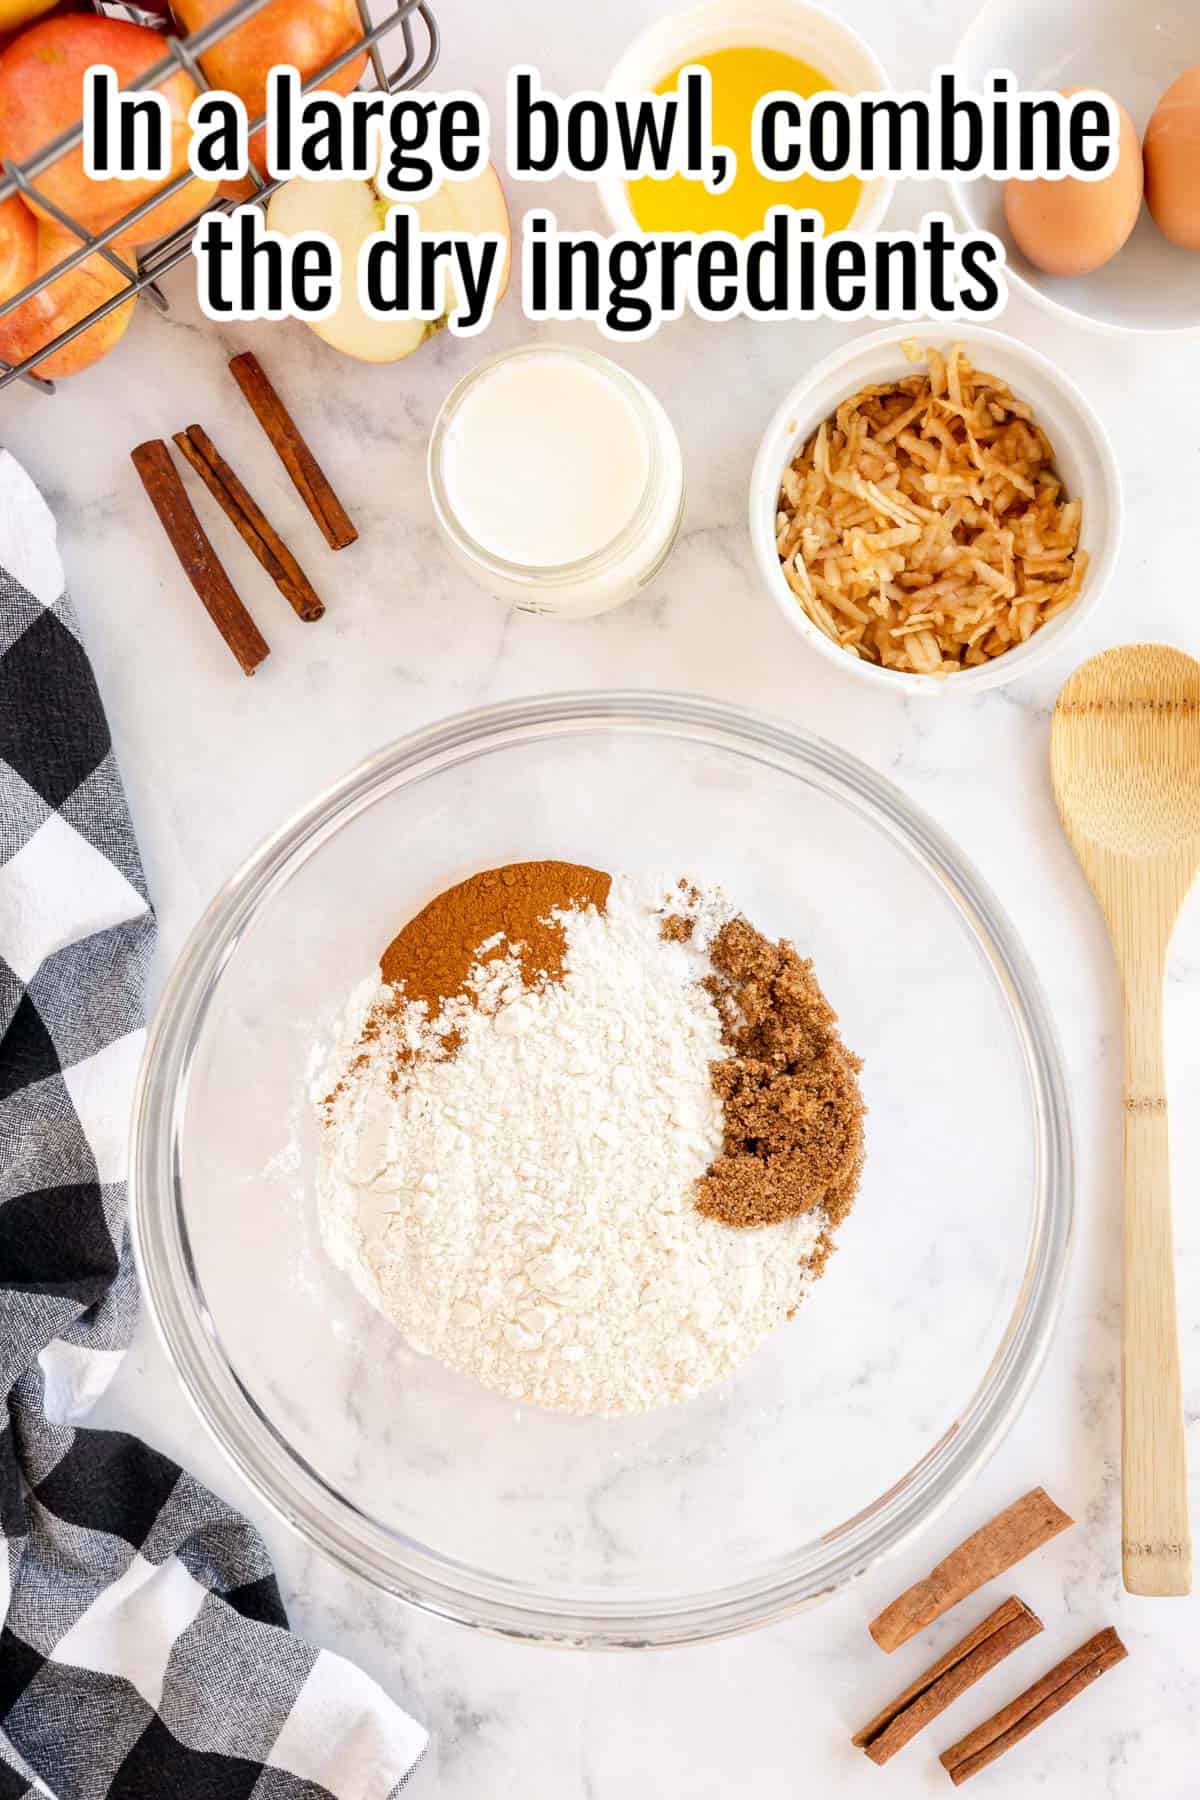 mixing the dry ingredients - process image with instructions overlaid in text.